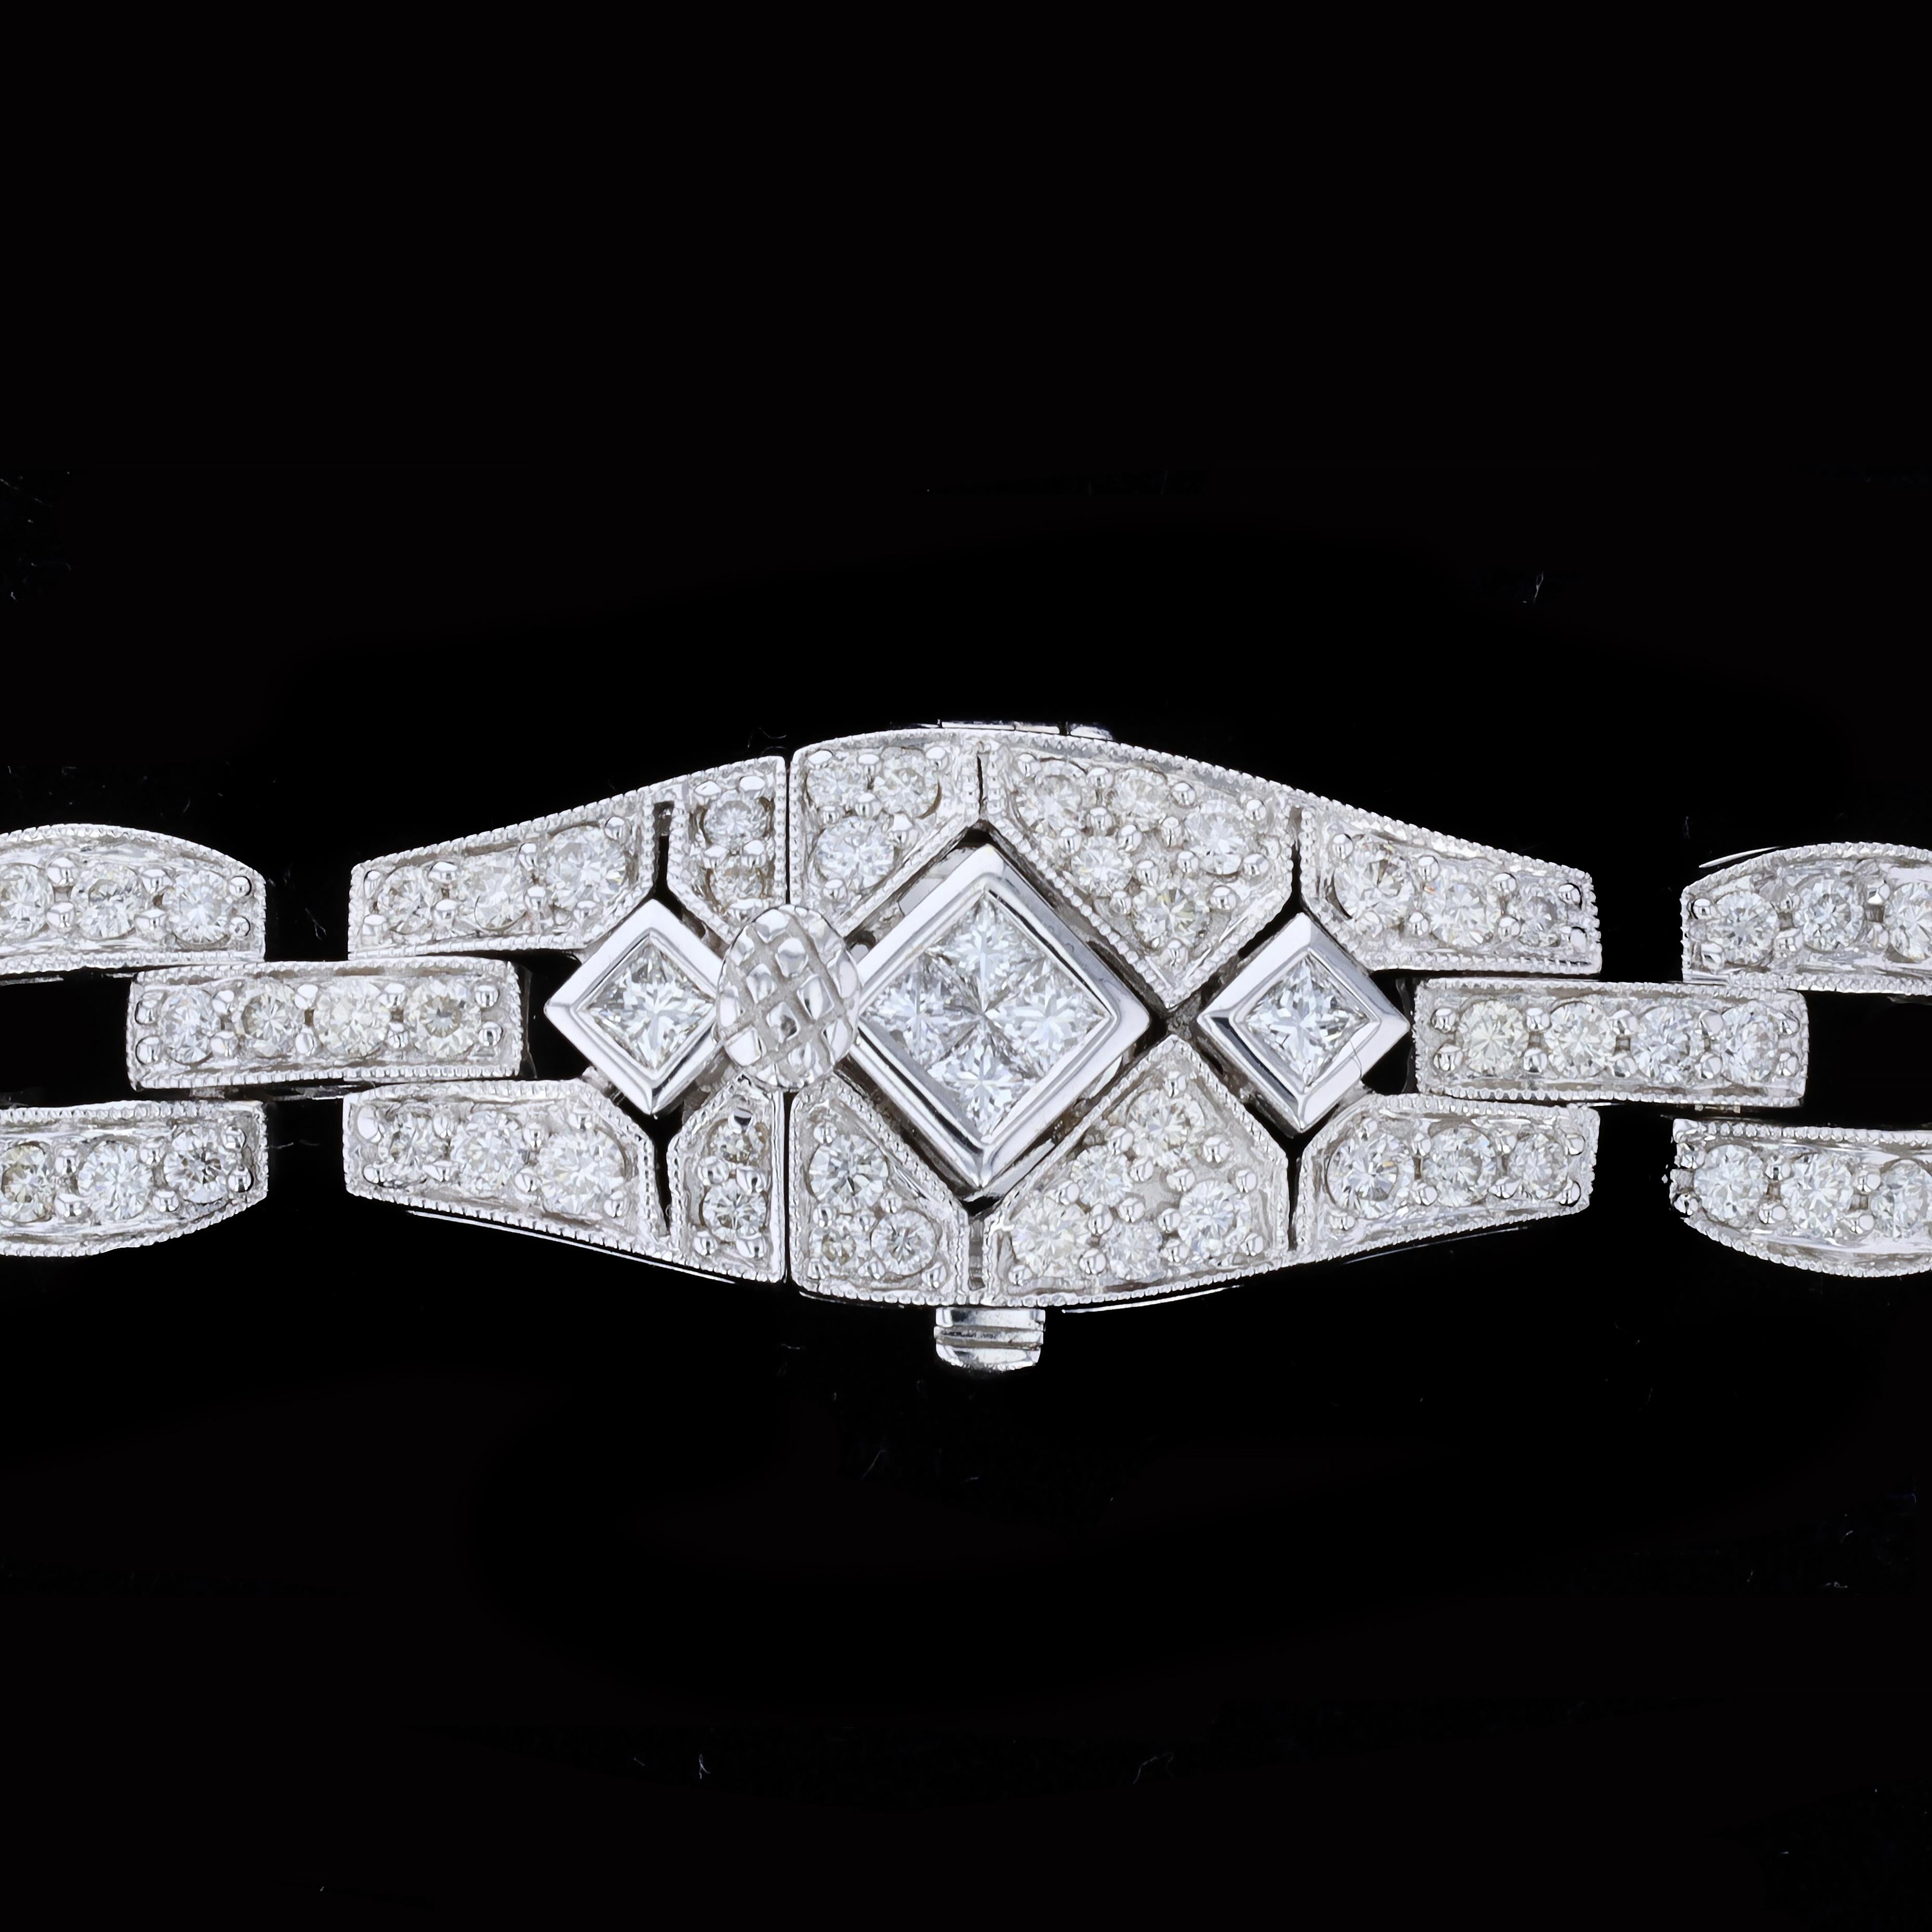 Vintage style dazzles in this intricately designed Art Deco diamond bracelet. This exquisite 18K white gold bracelet features 4.73ct. in princess and round cut diamonds set in square links and diamond shapes. The color of the diamonds is H with VS1